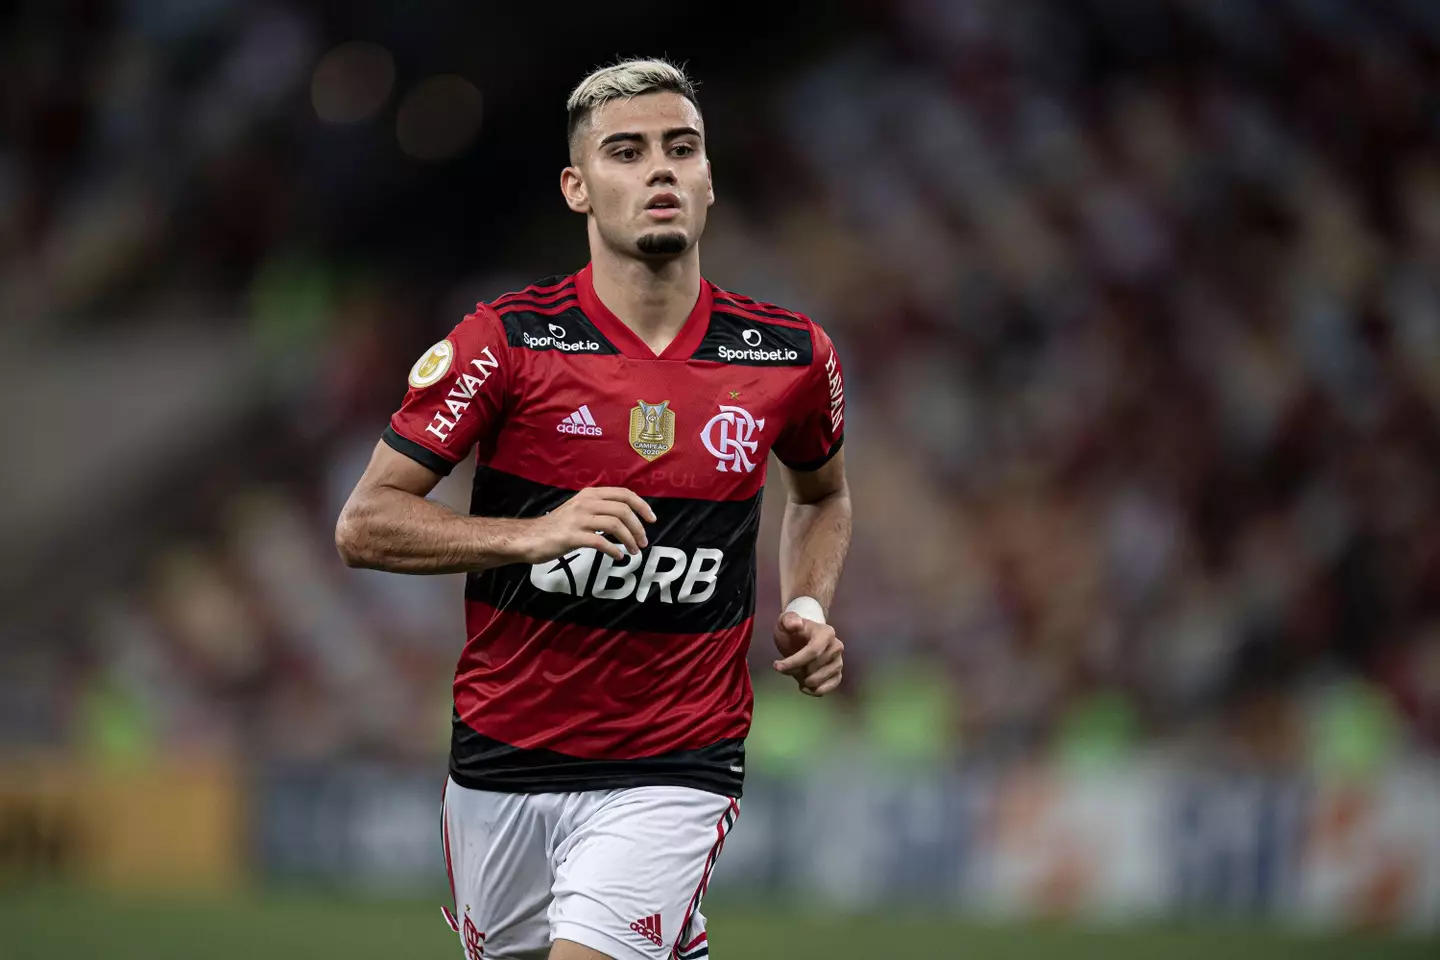 Pereira has impressed back in Brazil. Image: PA Images